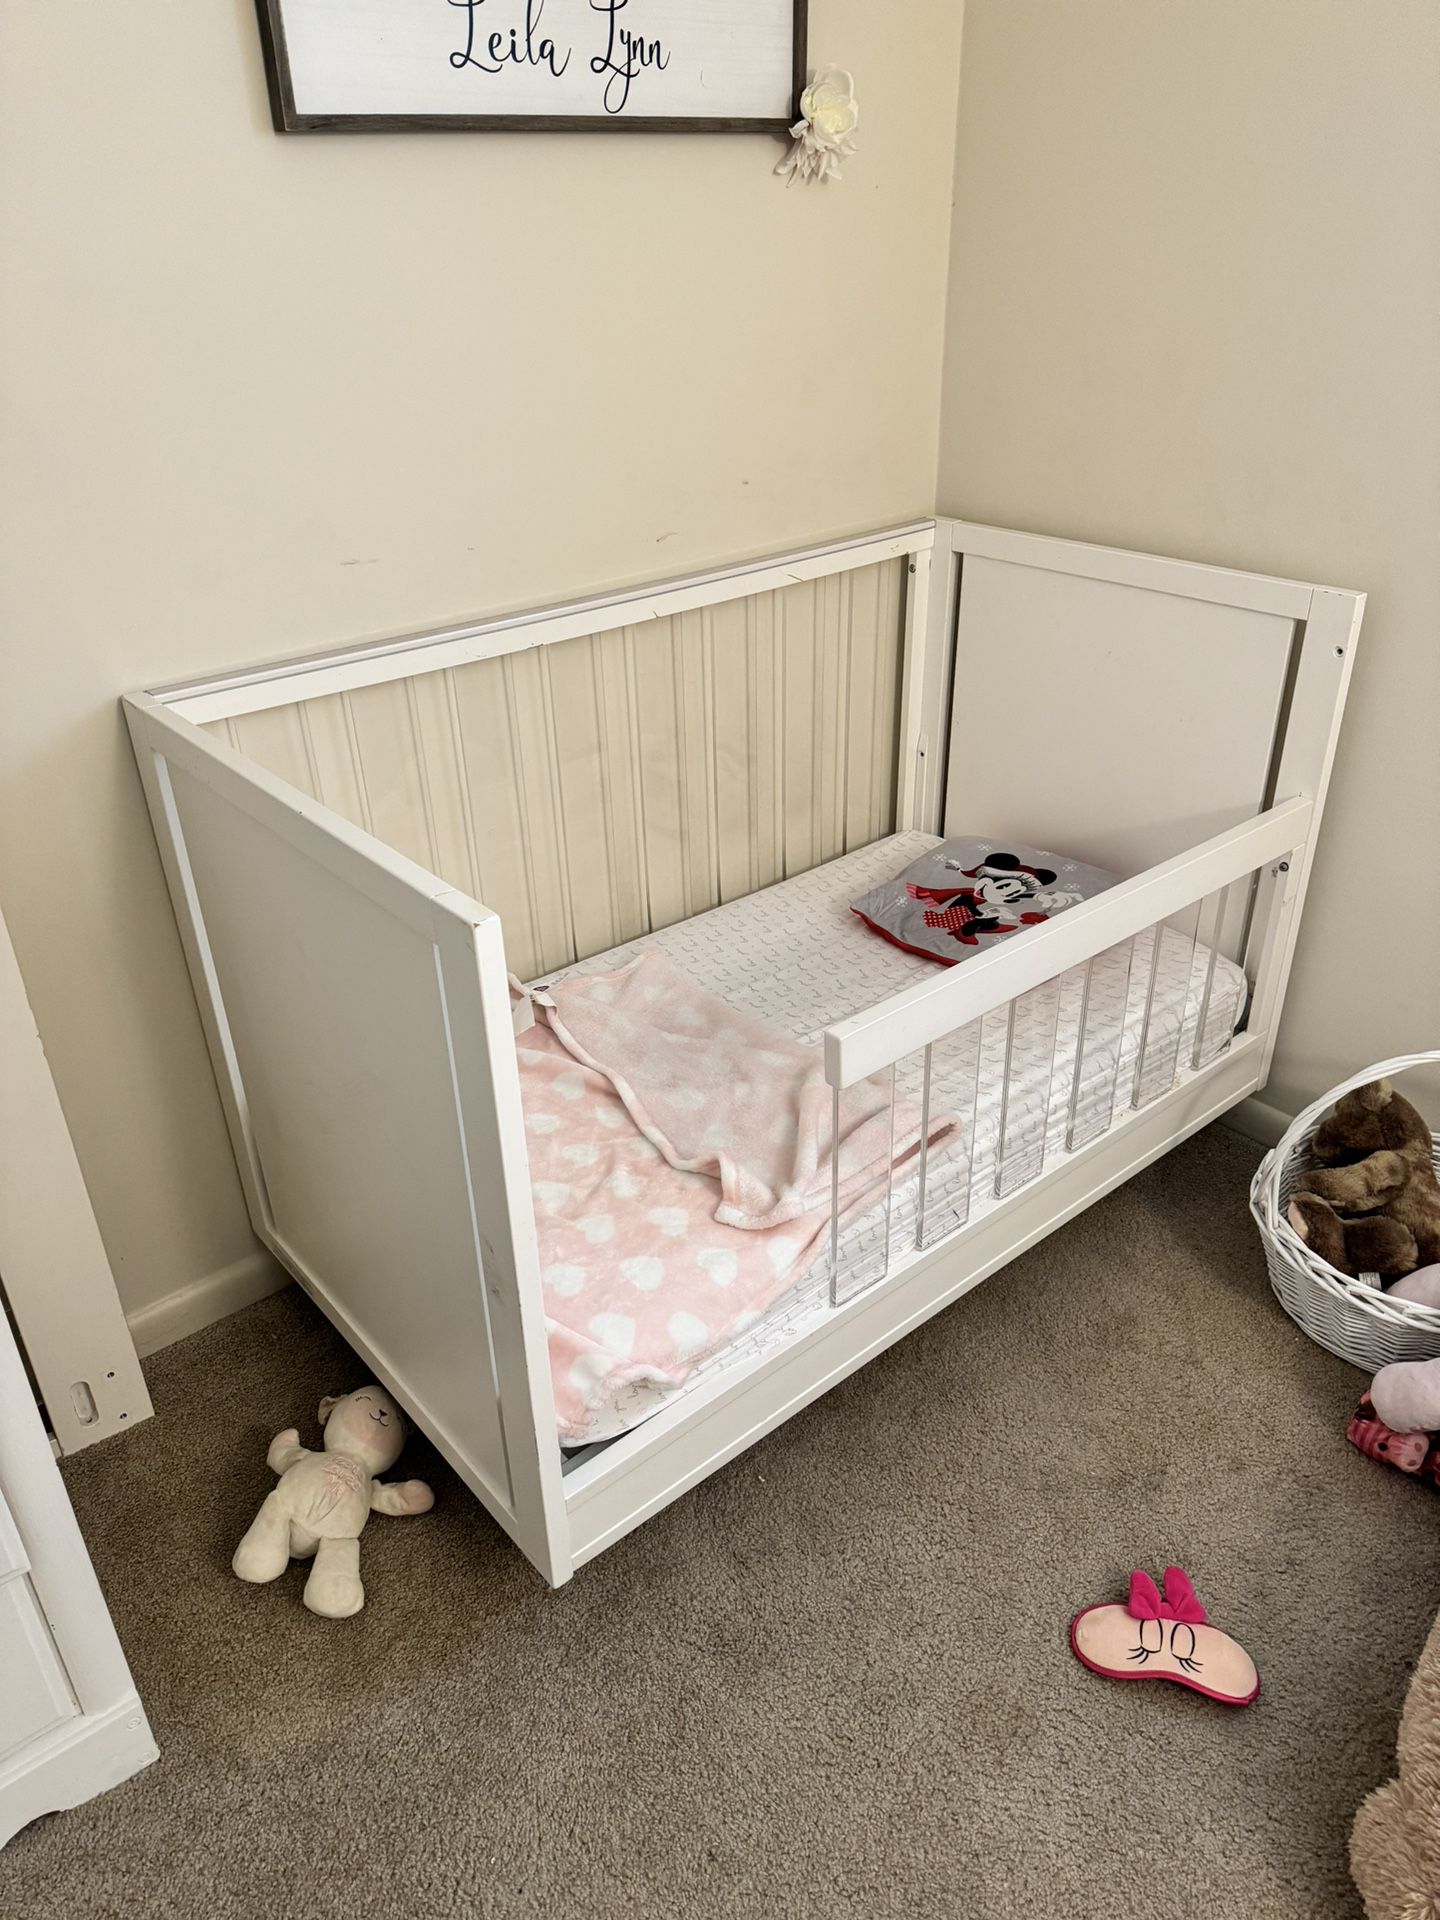 Pottery Barn Crib/ Coverts to Toddler Bed